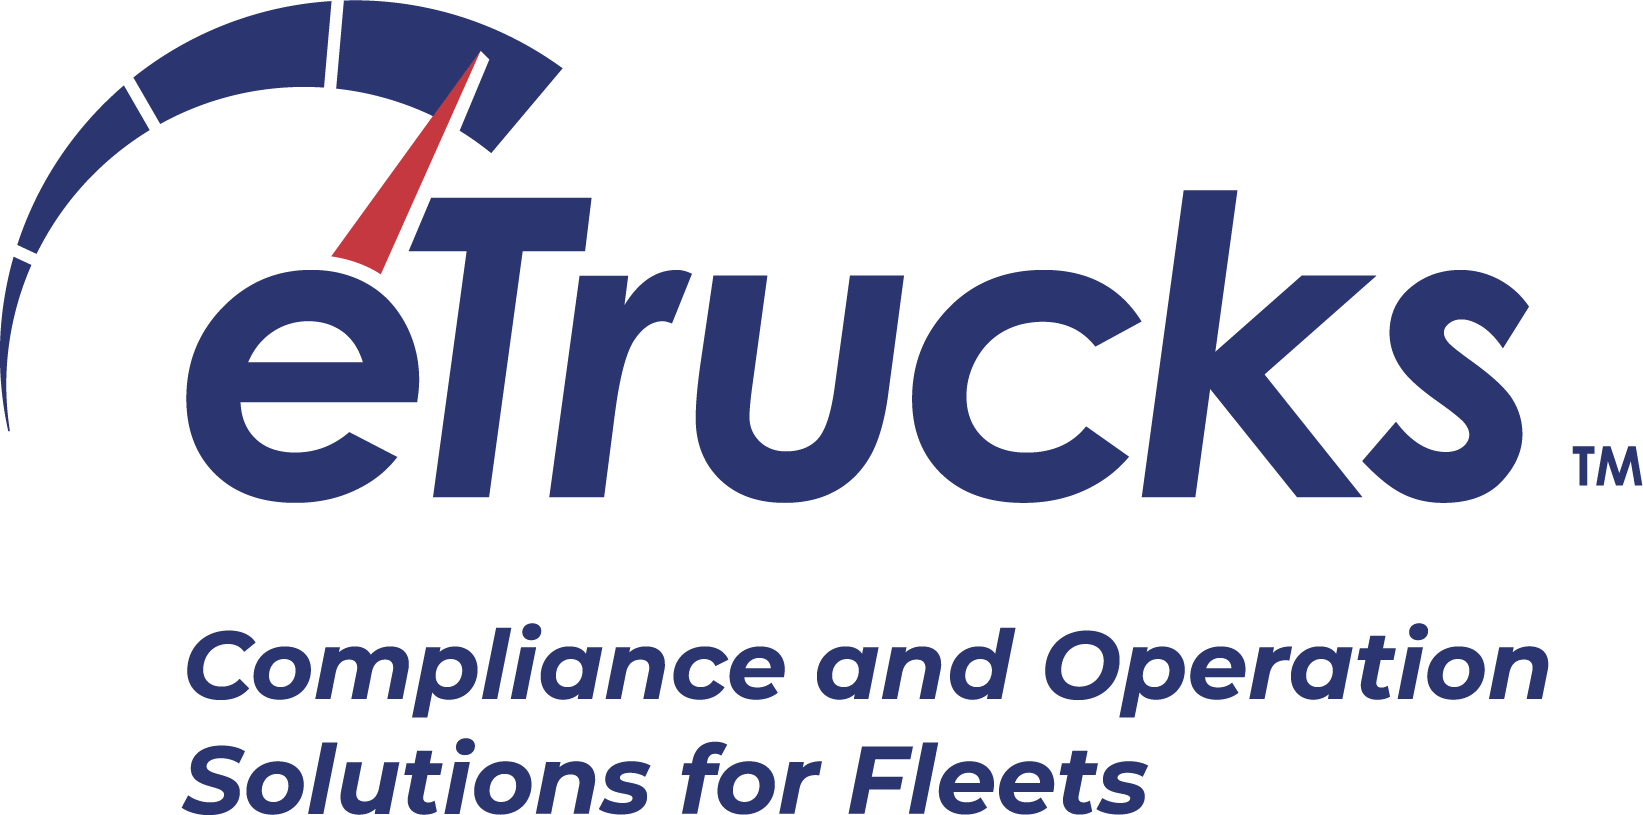 eTrucks - Compliance and Operation Solutions for Fleets